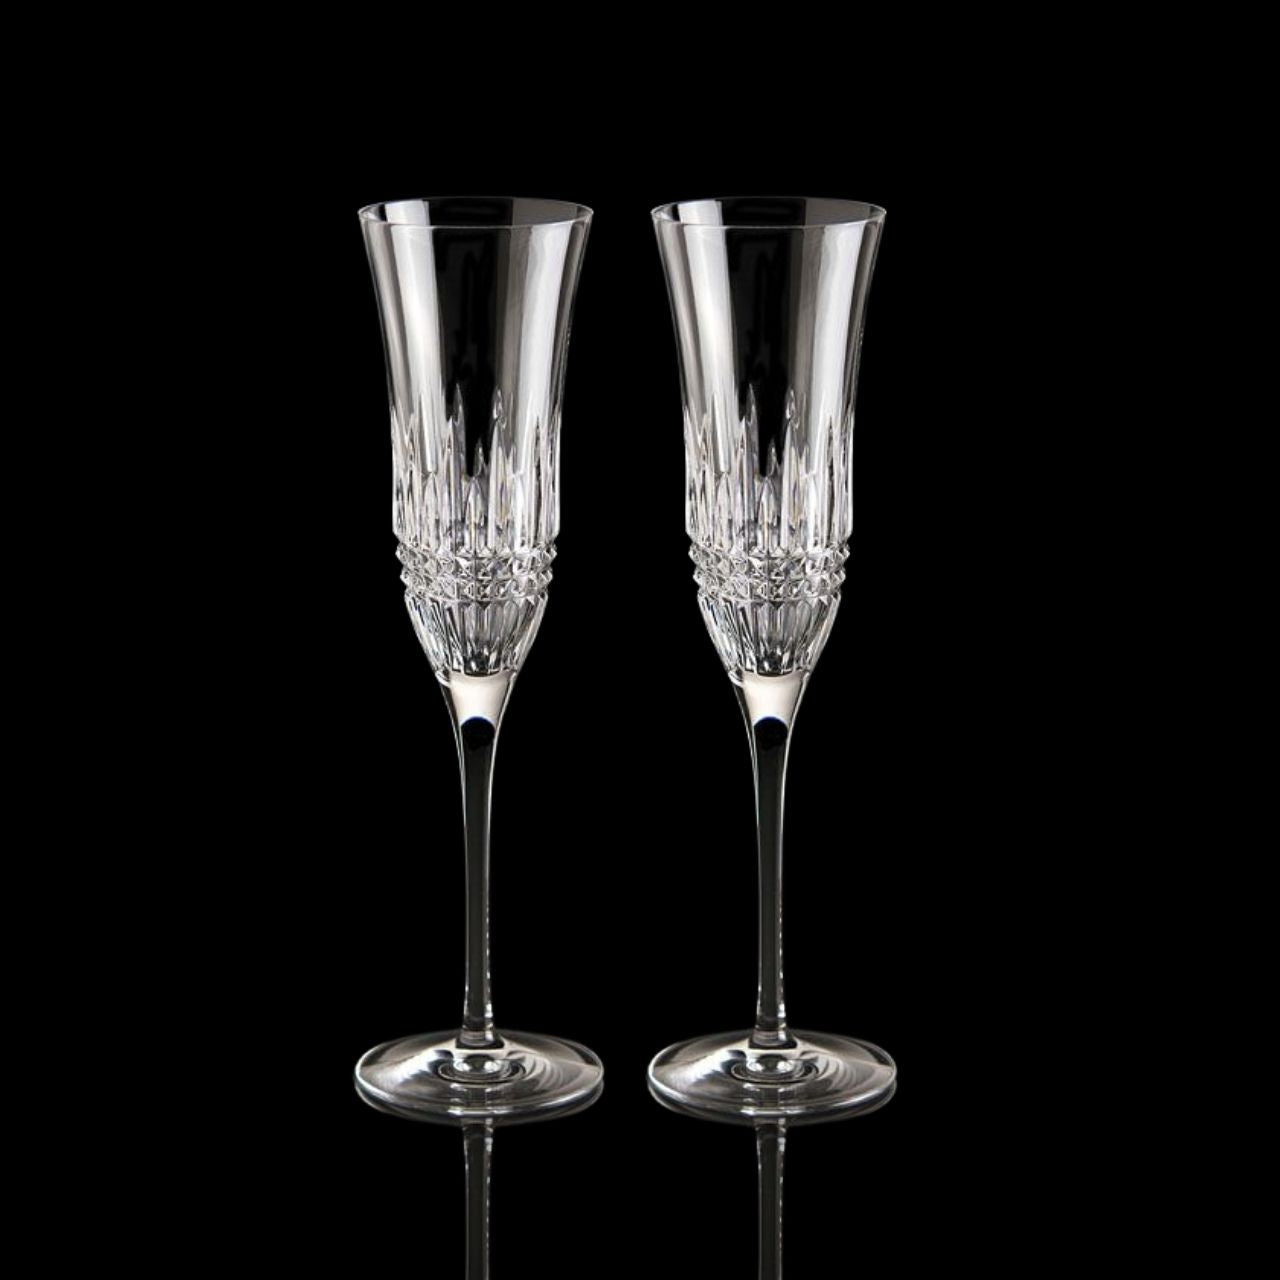 Lismore Diamond Essence Flute 8 OZ Set/2  This classic Lismore Diamond Essence Flute Pair from Waterford offer the perfect serve for your sparkling wine. Featuring the famous ring and upright cuts of the Lismore Diamond pattern, these traditional flutes will co-ordinate well with existing Diamond pieces as well as bring their own style to your home.